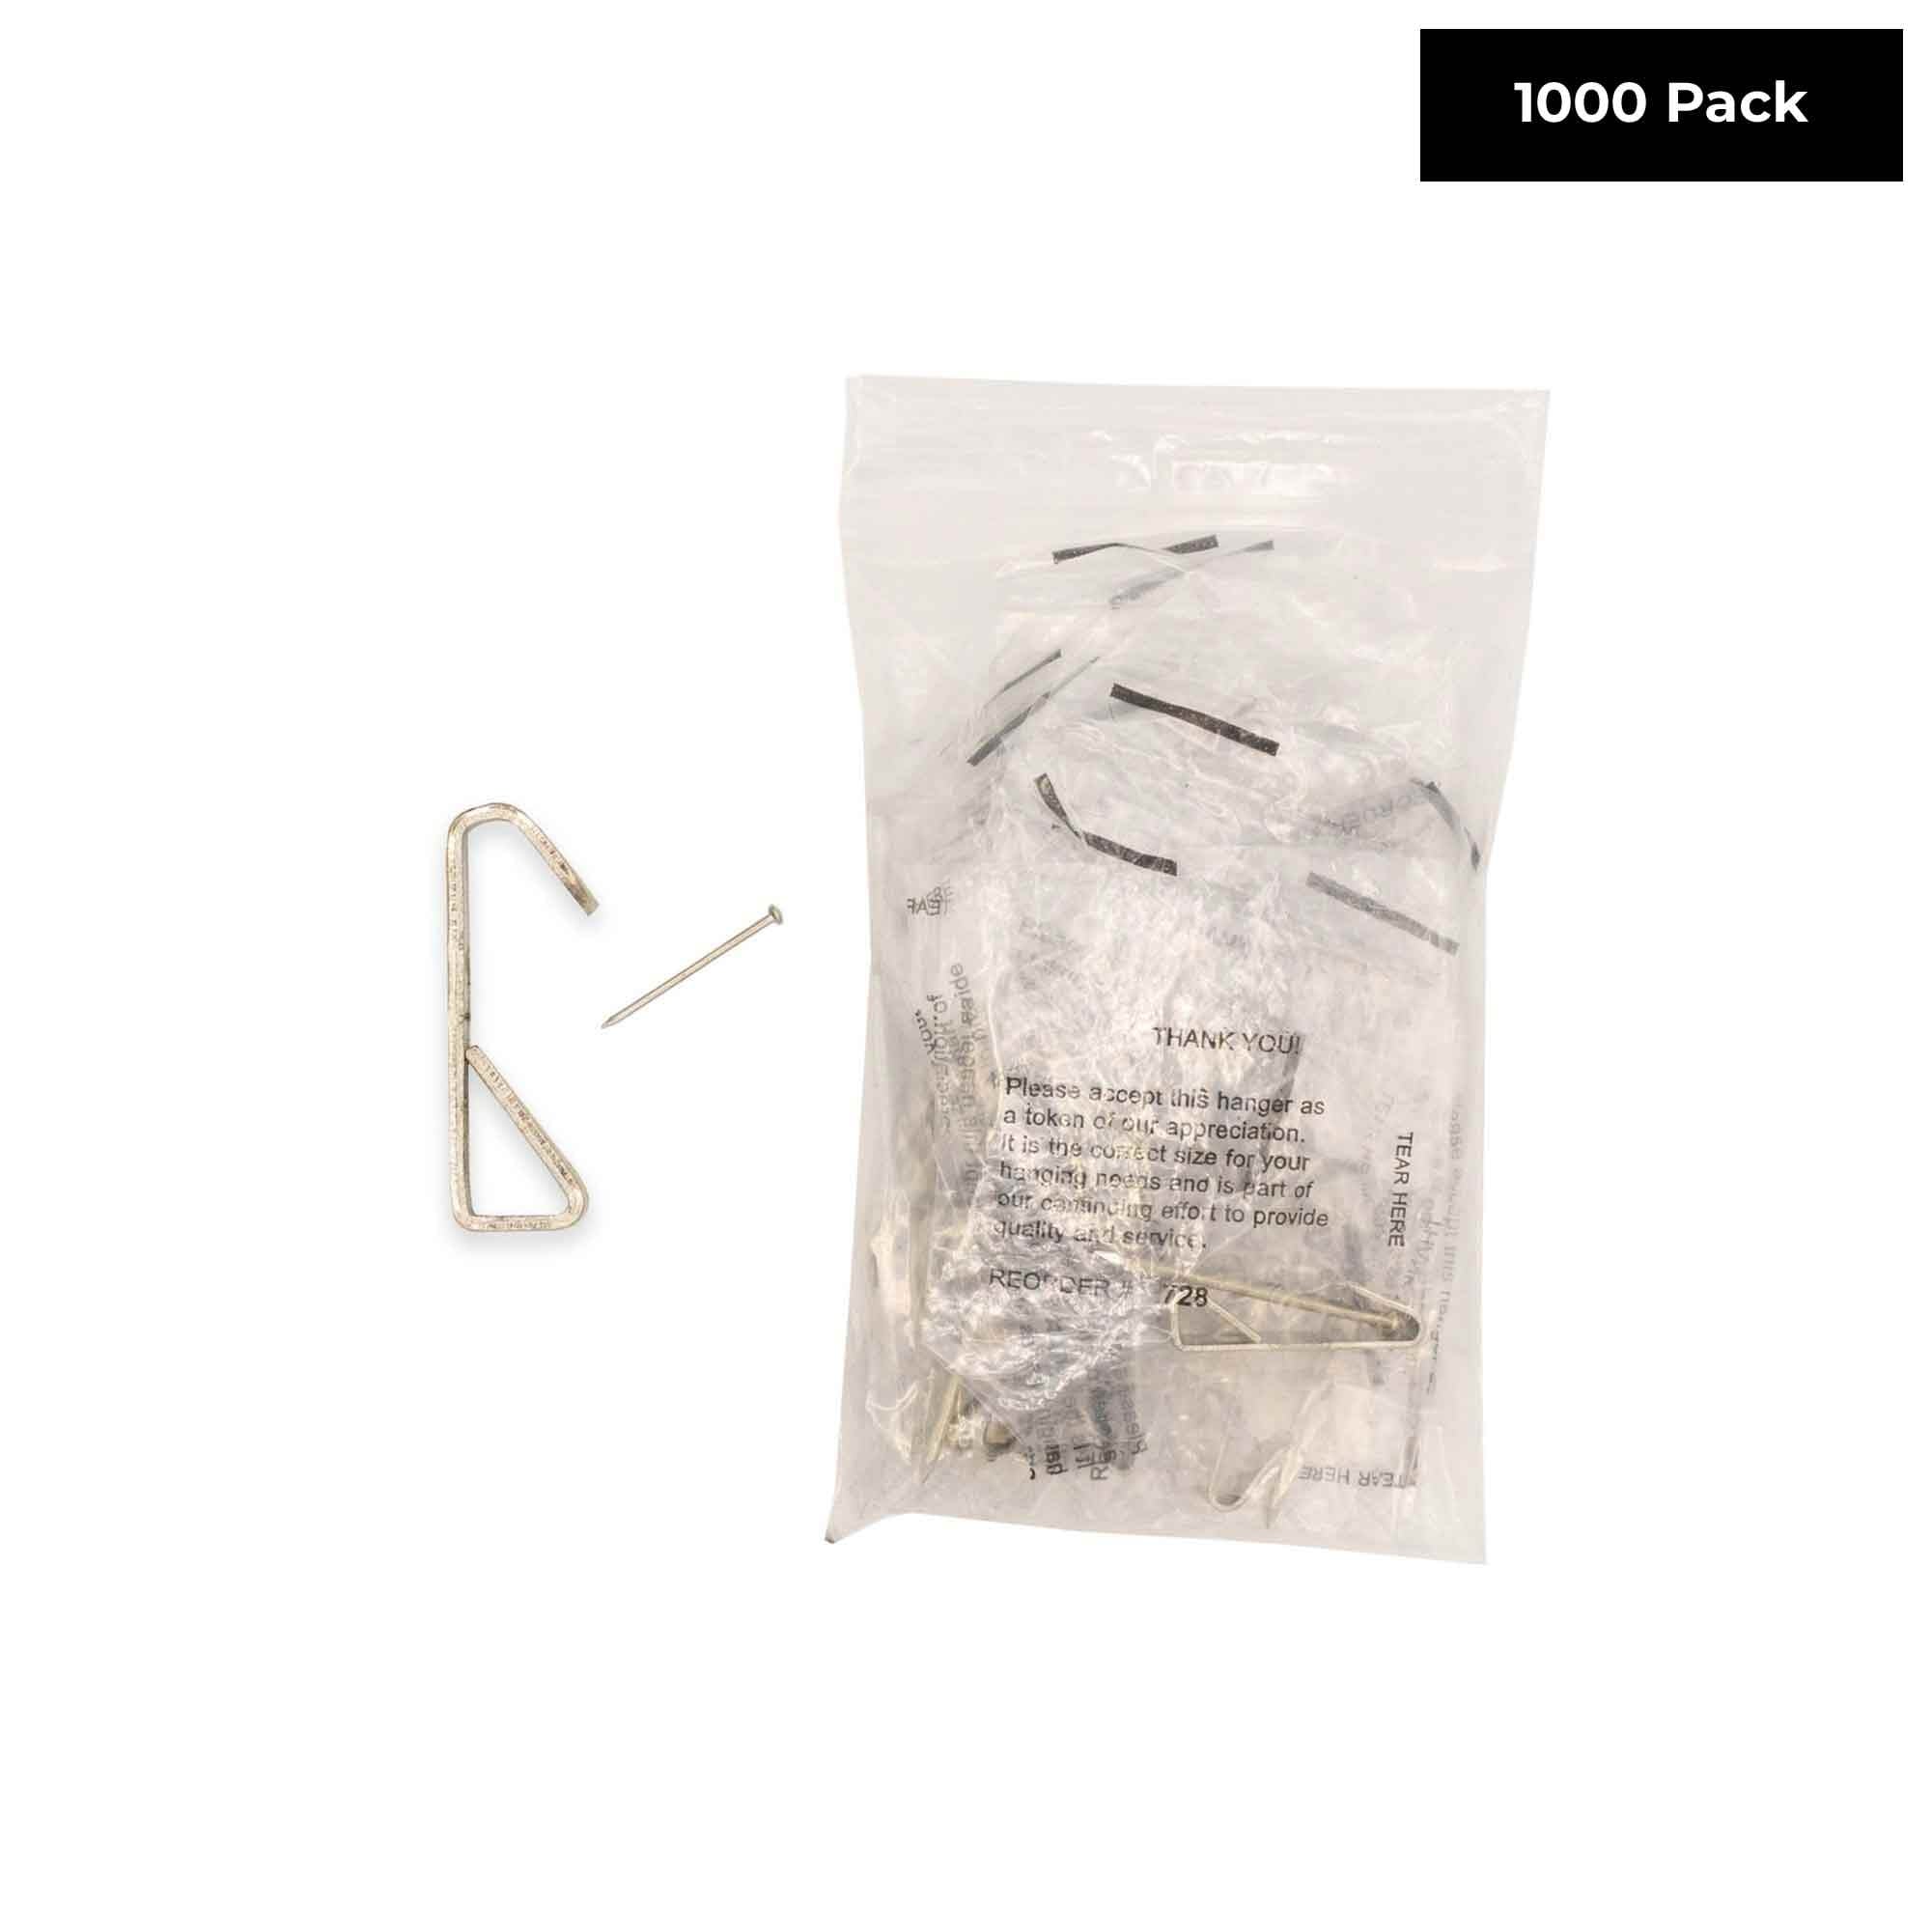 50 LB Picture Hooks for Hanging Pictures Heavy Duty Hardware Hangers - Pack  of 1000 Hooks and Nails for Pictures